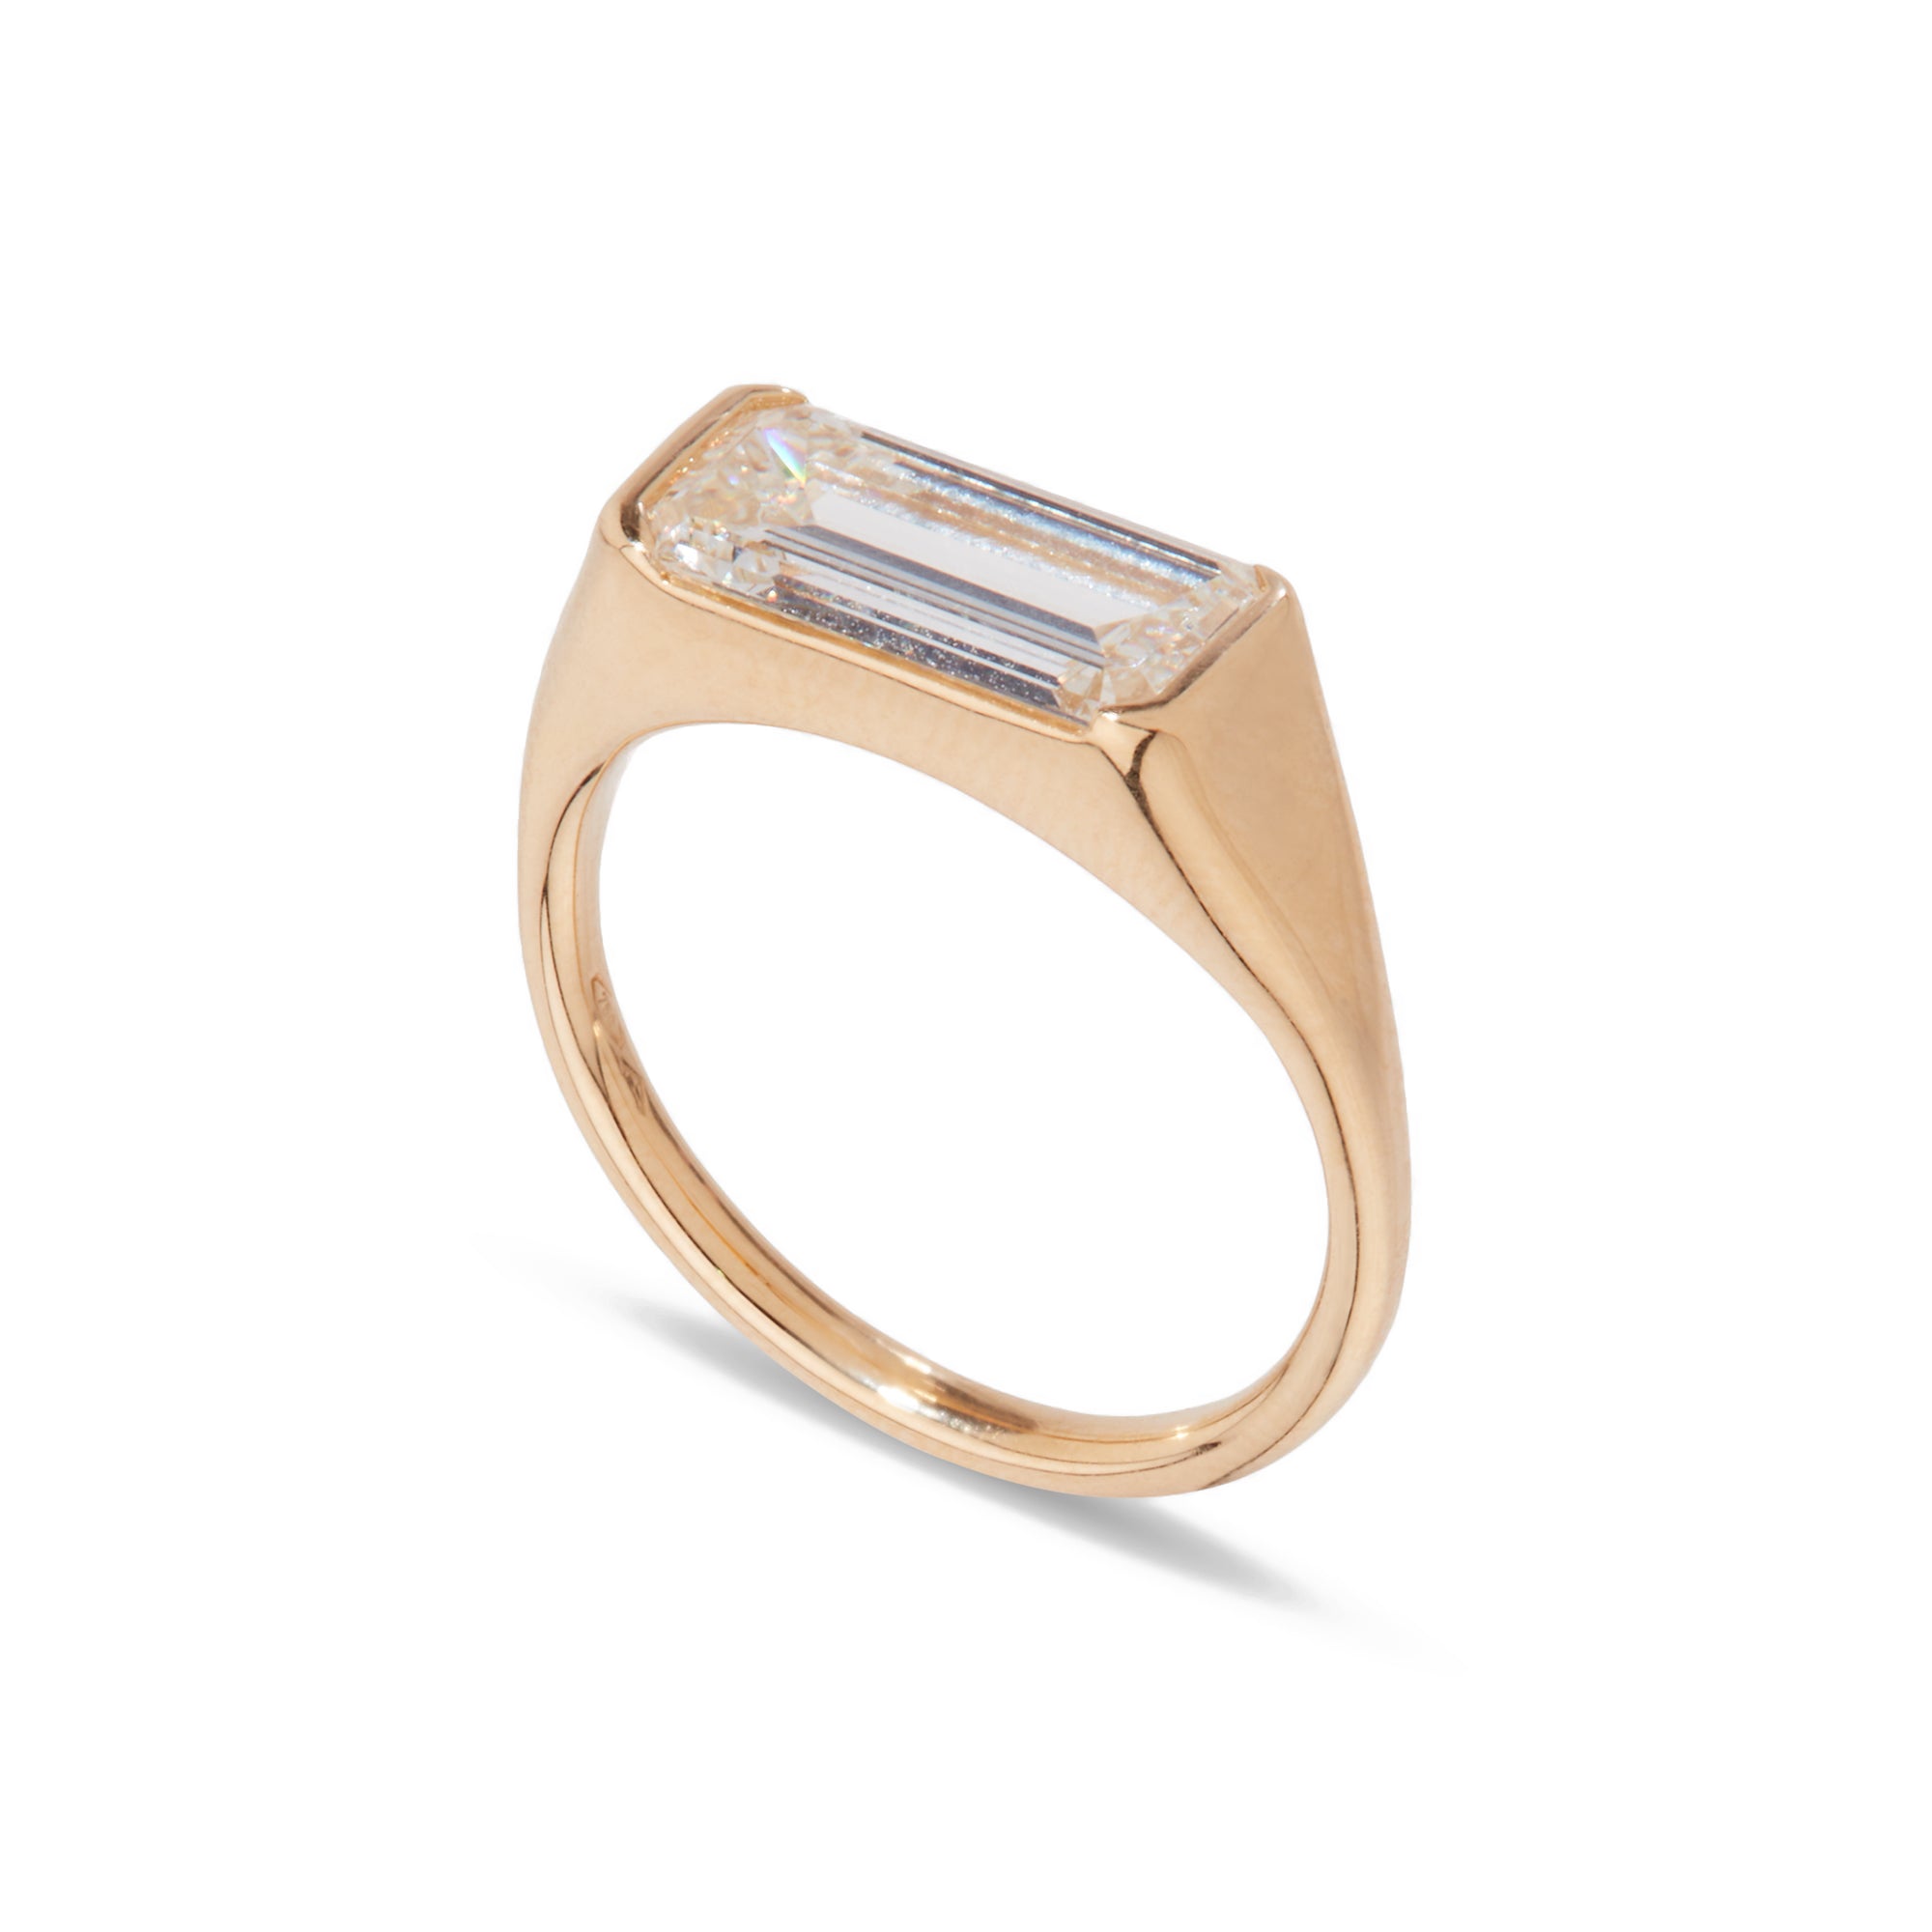 Statement Signet Ring with a F.U. Diamond and Hand Engraving – ARTEMER